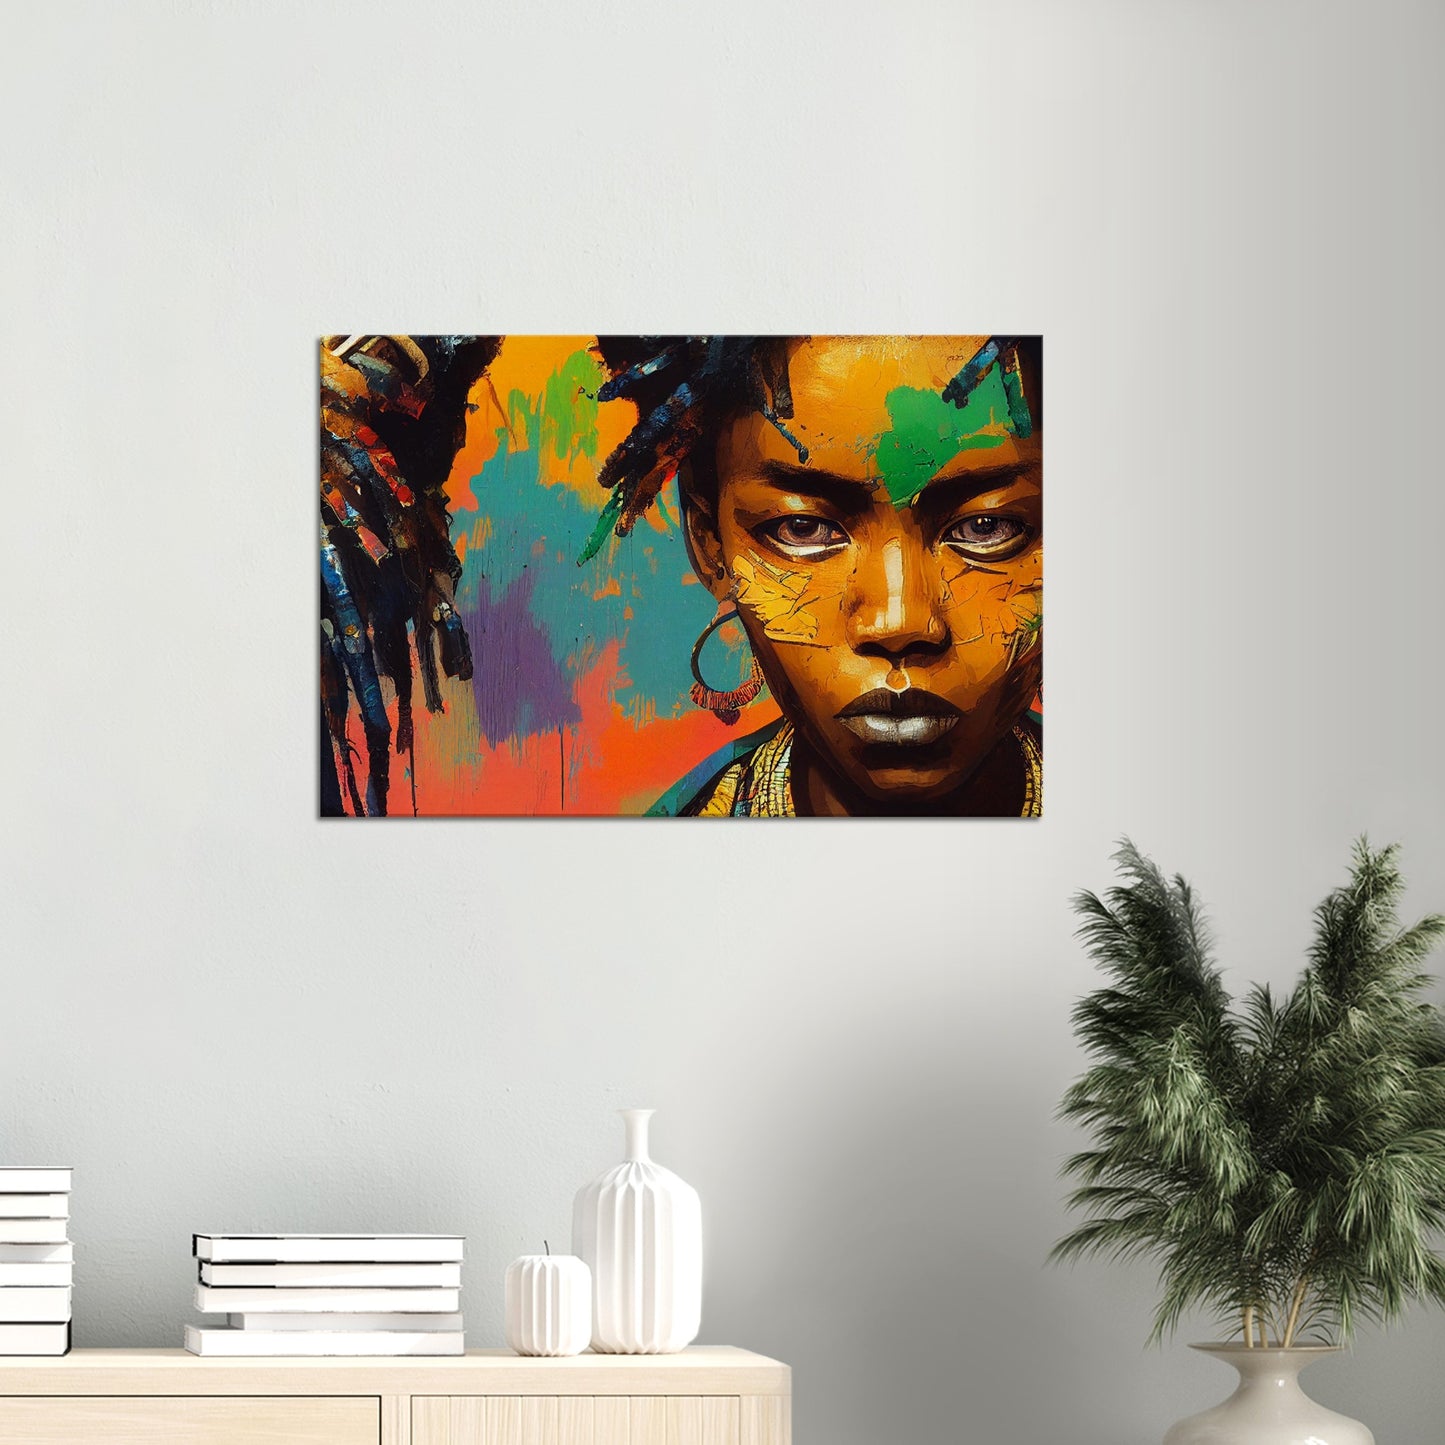 African Tribe Girl - Urban Art on Canvas